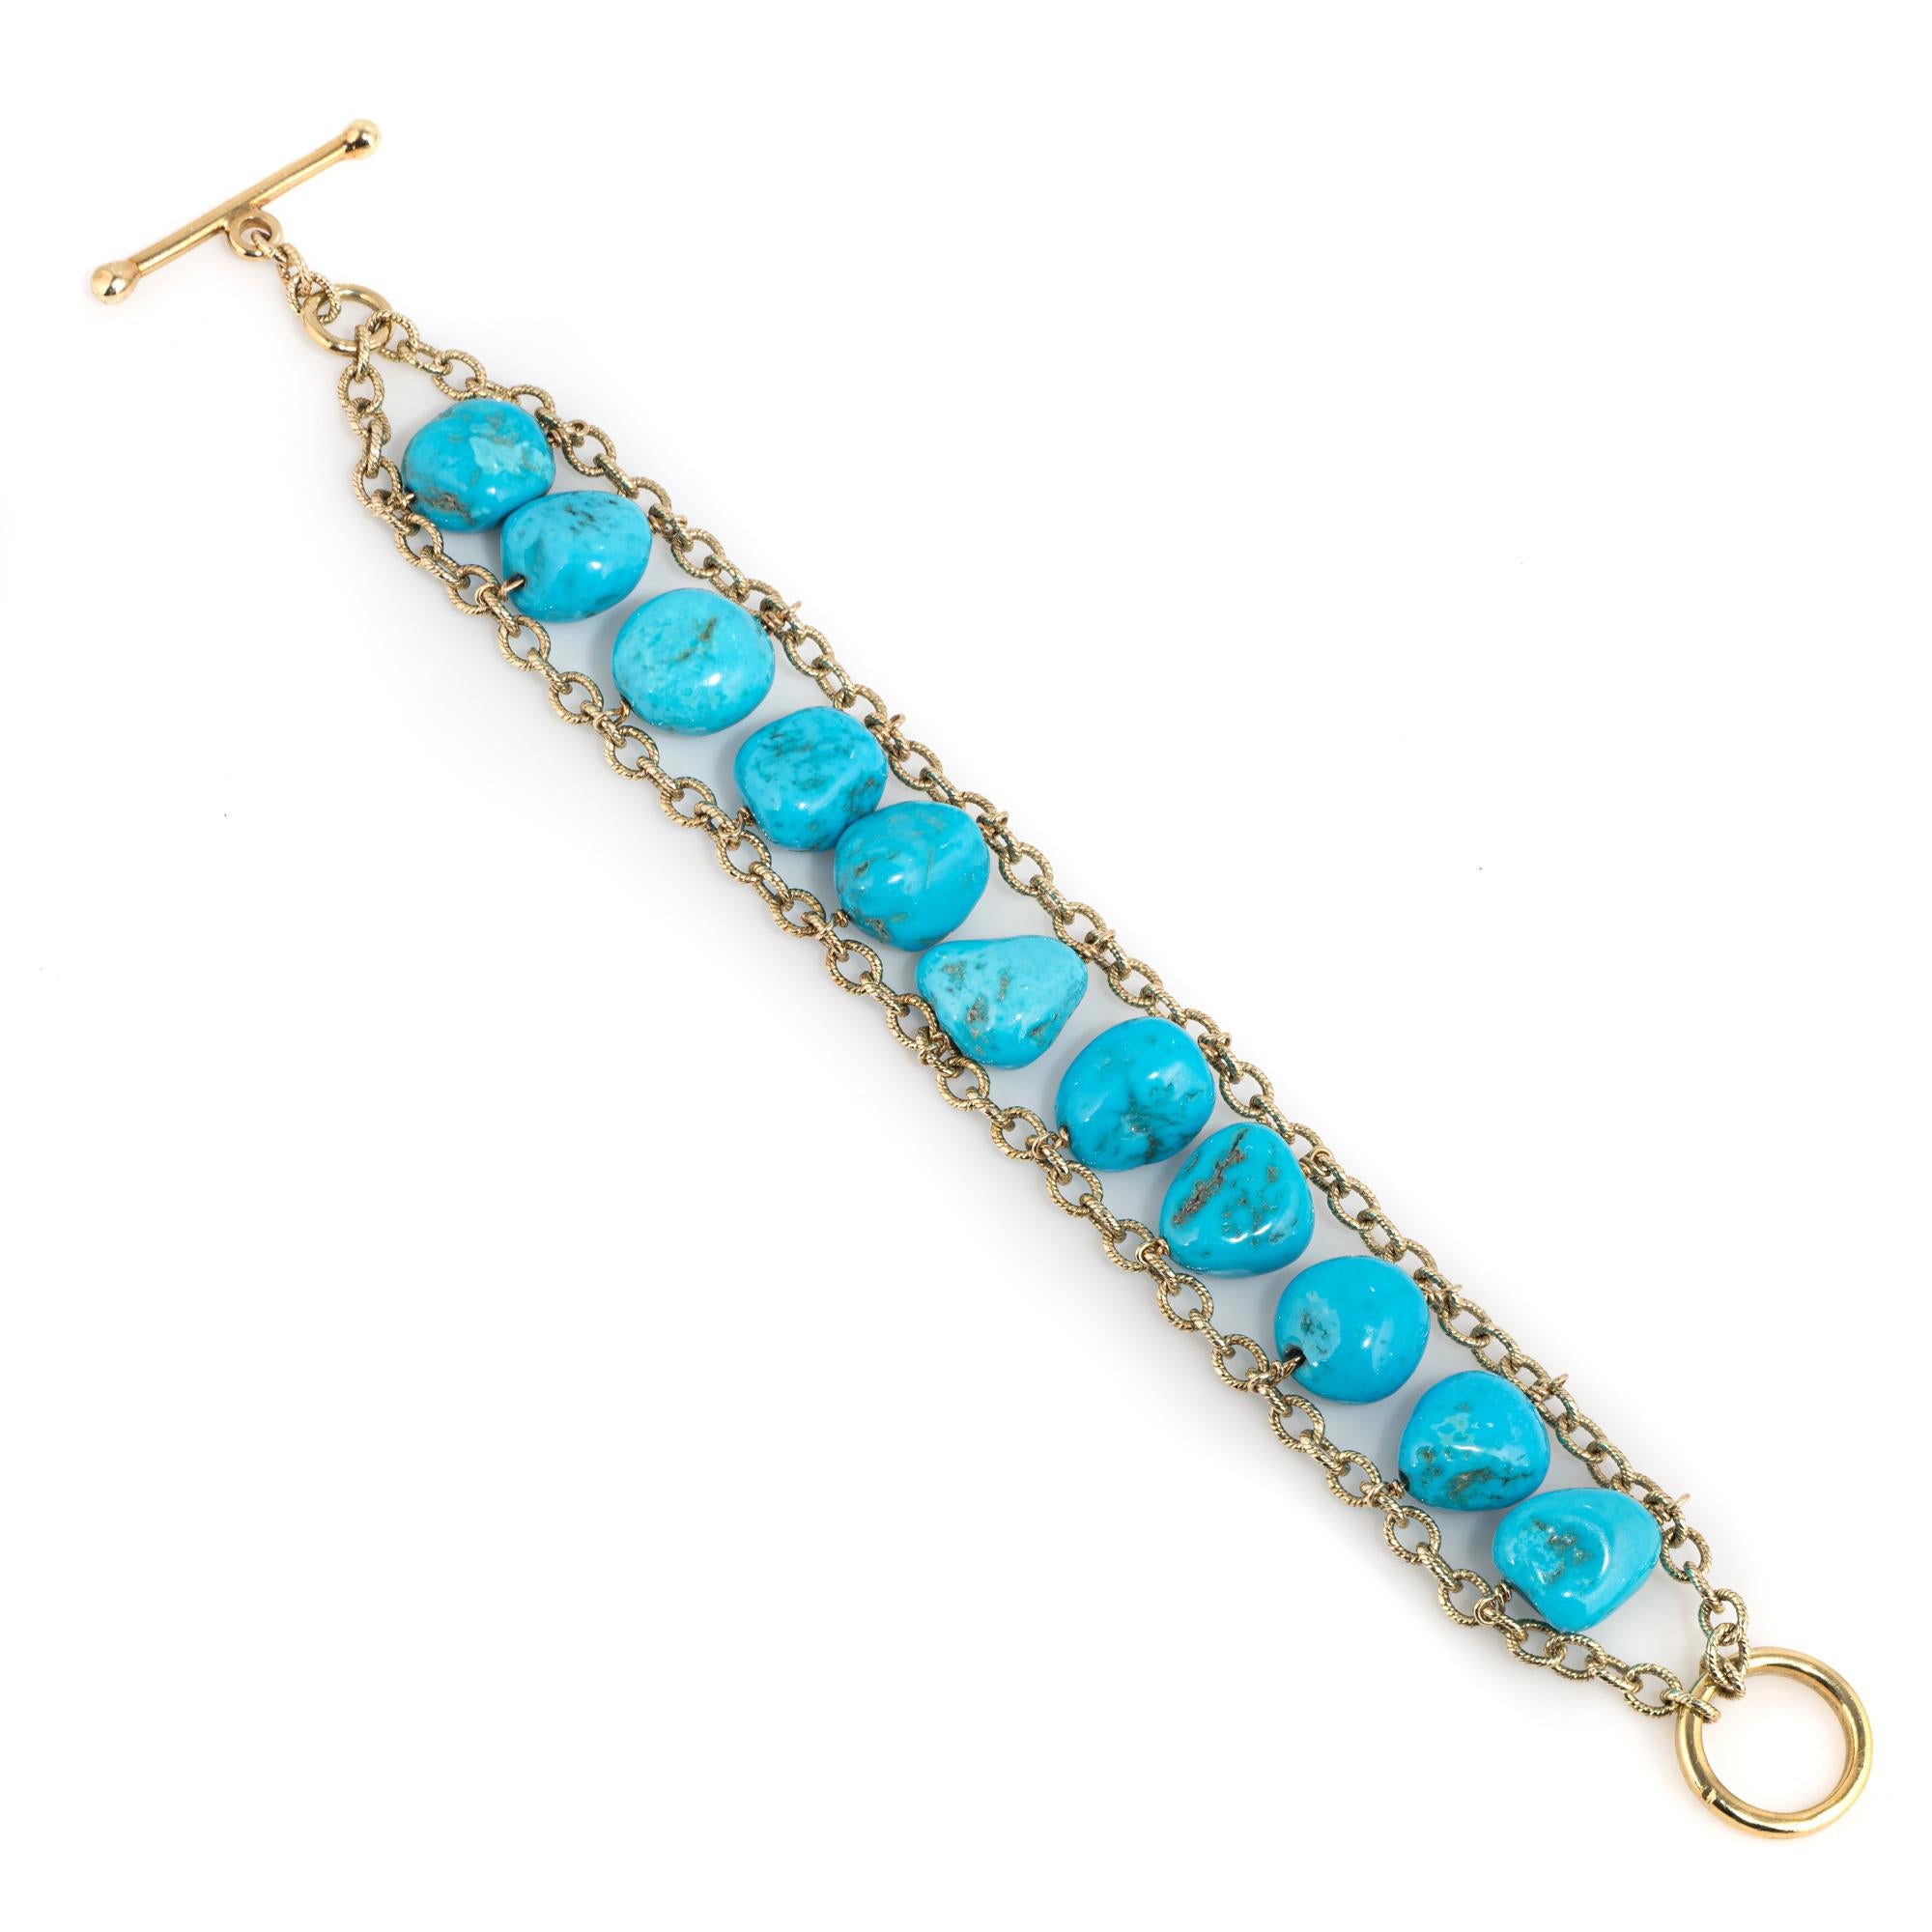 Stylish and finely detailed estate turquoise bracelet crafted in 14 karat yellow gold. 

Natural turquoise beads measure (average) 12mm each. The turquoise is in excellent condition and free of cracks or chips. 

The bracelet makes a nice statement